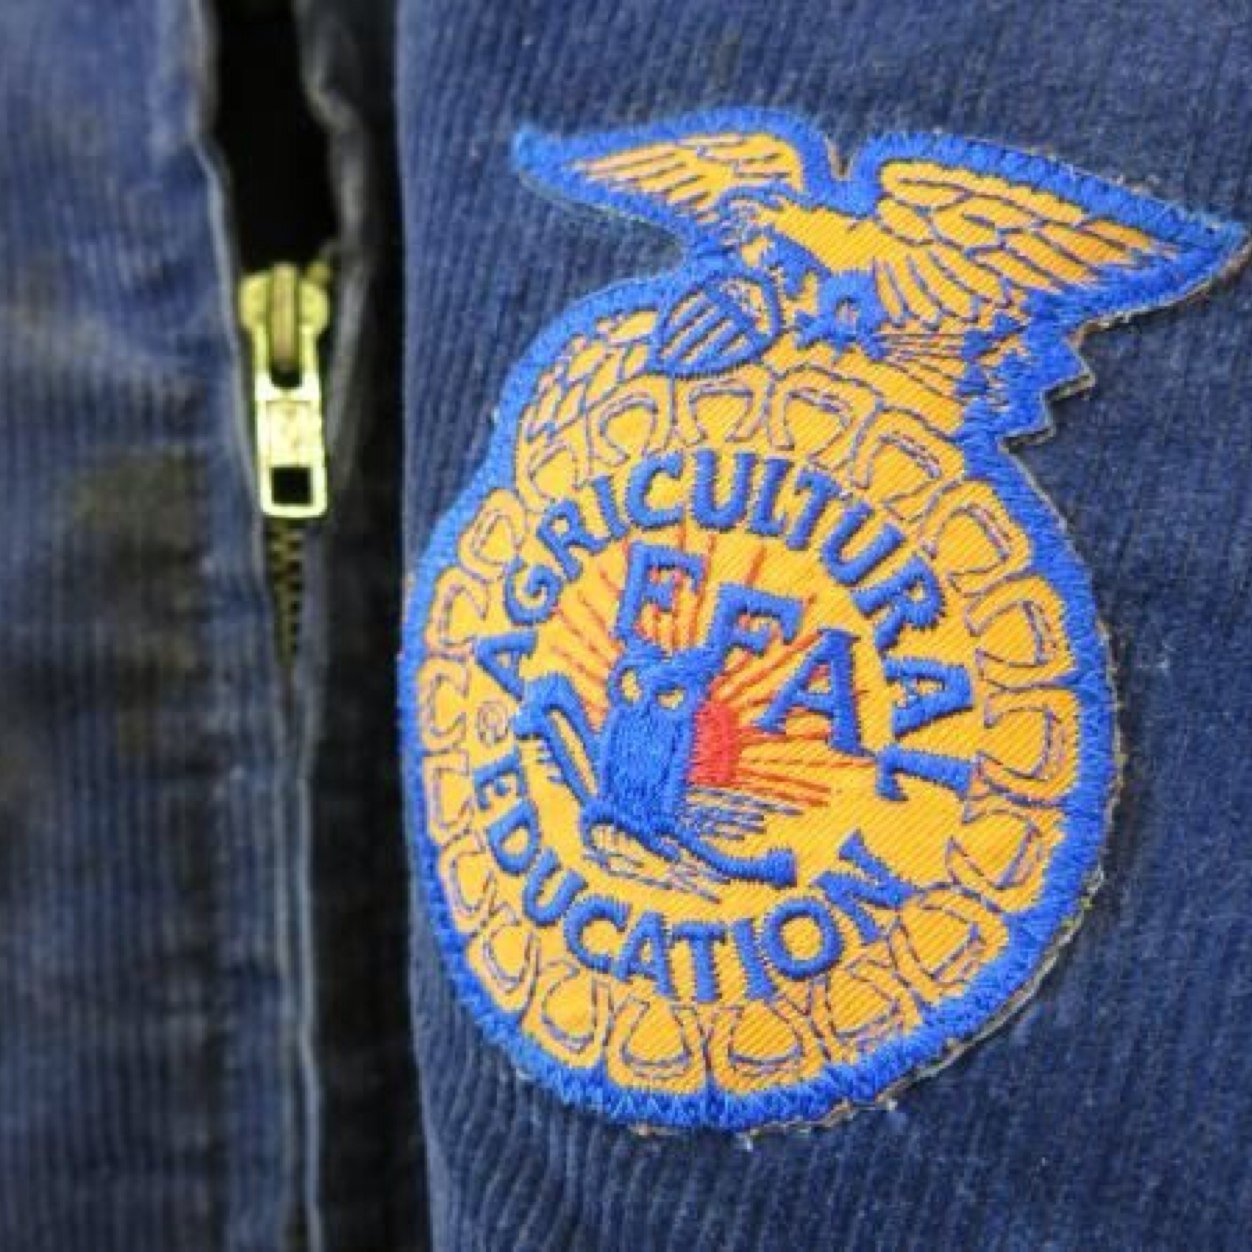 FFA is my passion. Blue jeans and square toes are my obsession. The Red, White, and Blue is my pride.